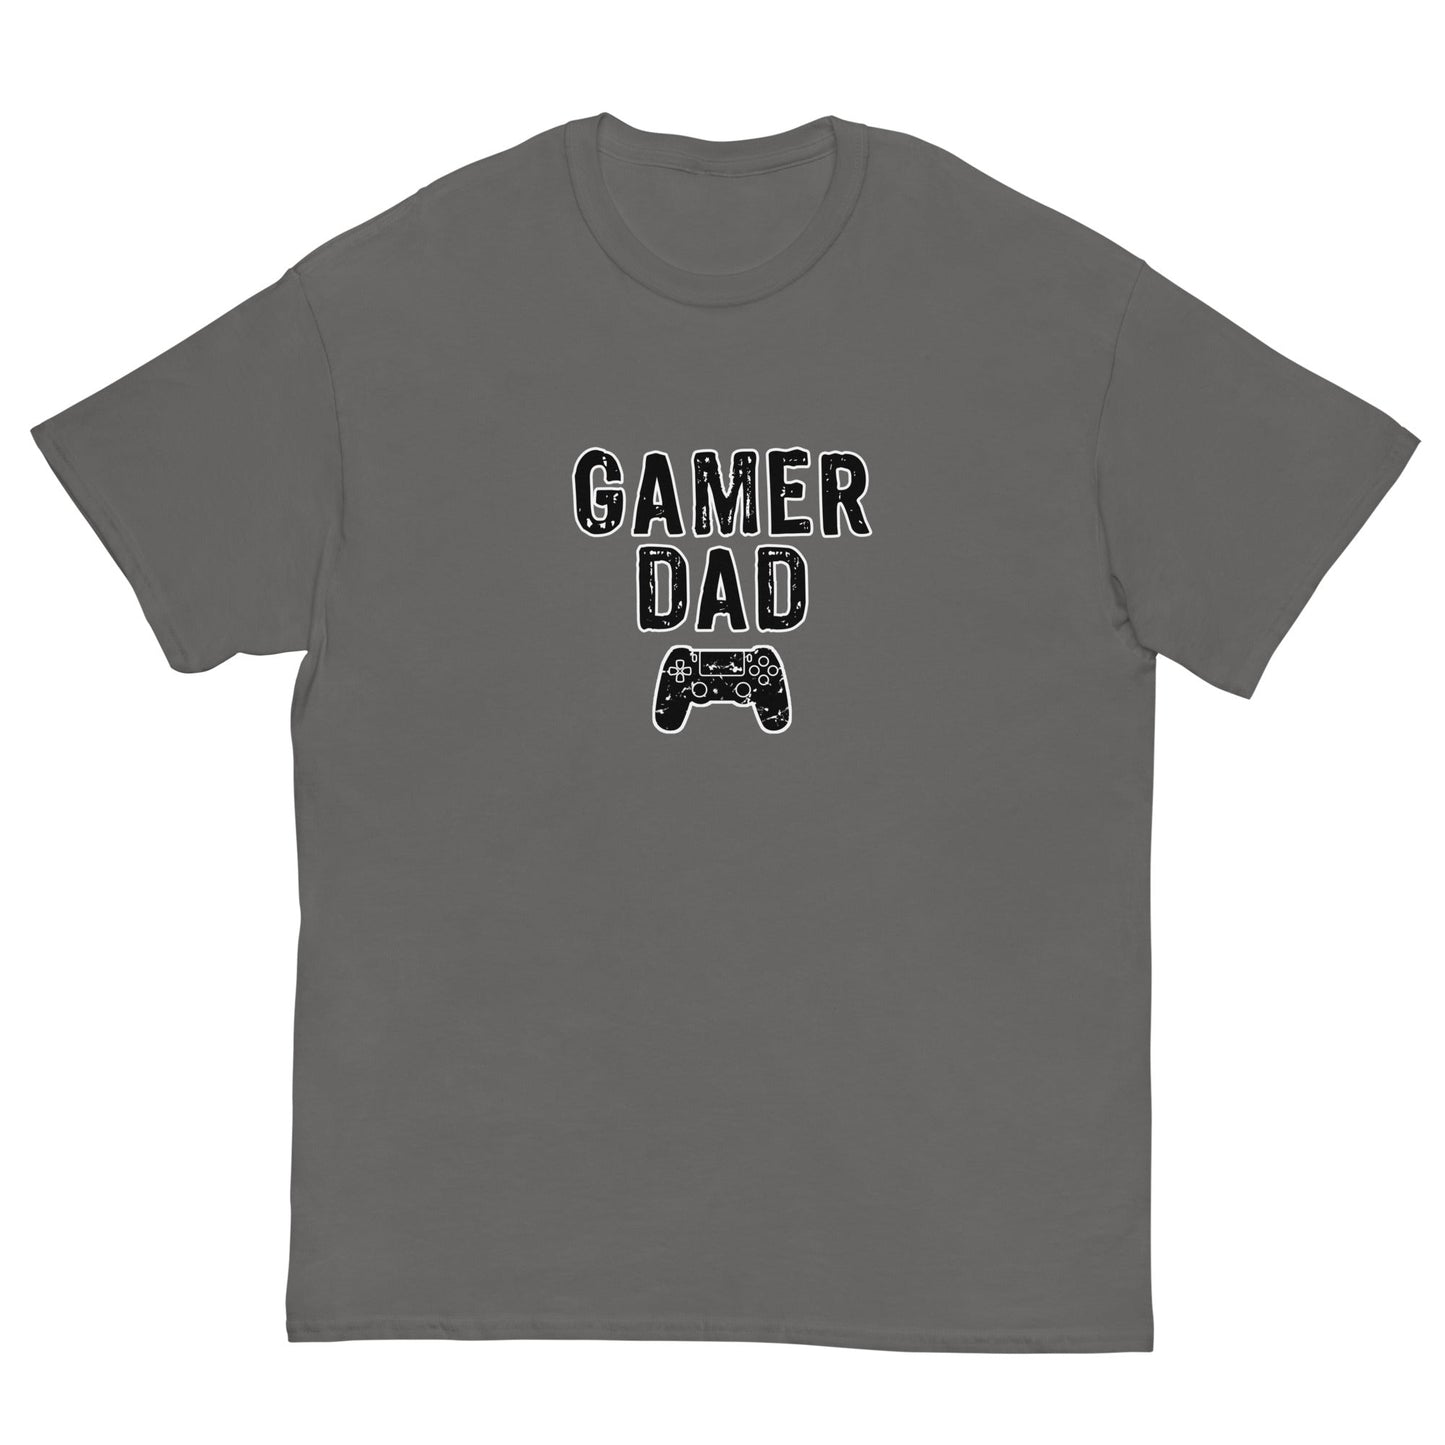 Gamer Dad T-shirt Charcoal / S